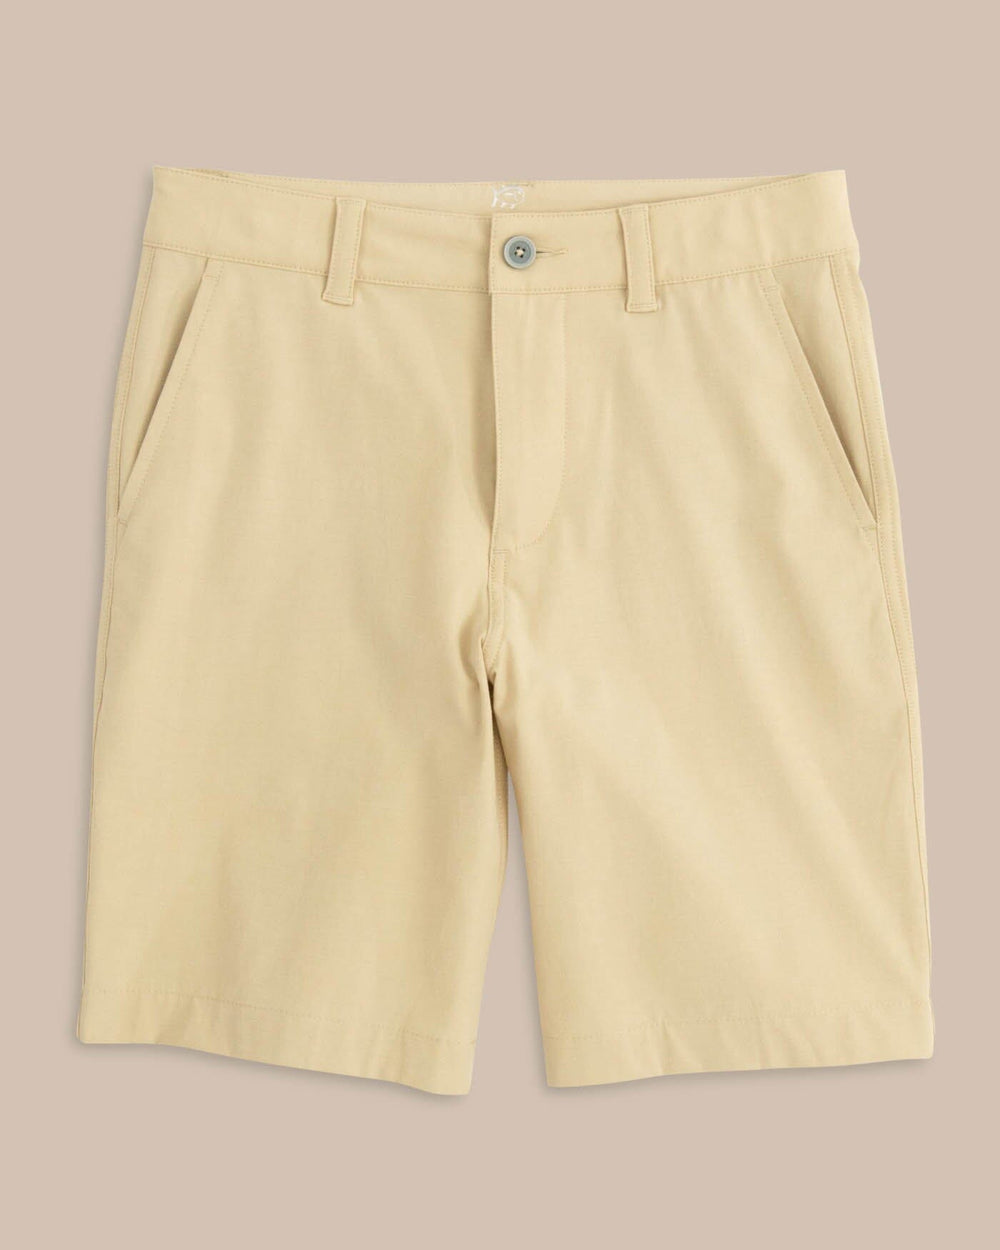 The front view of the Kid's Khaki T3 Gulf Short by Southern Tide - Coastal Khaki